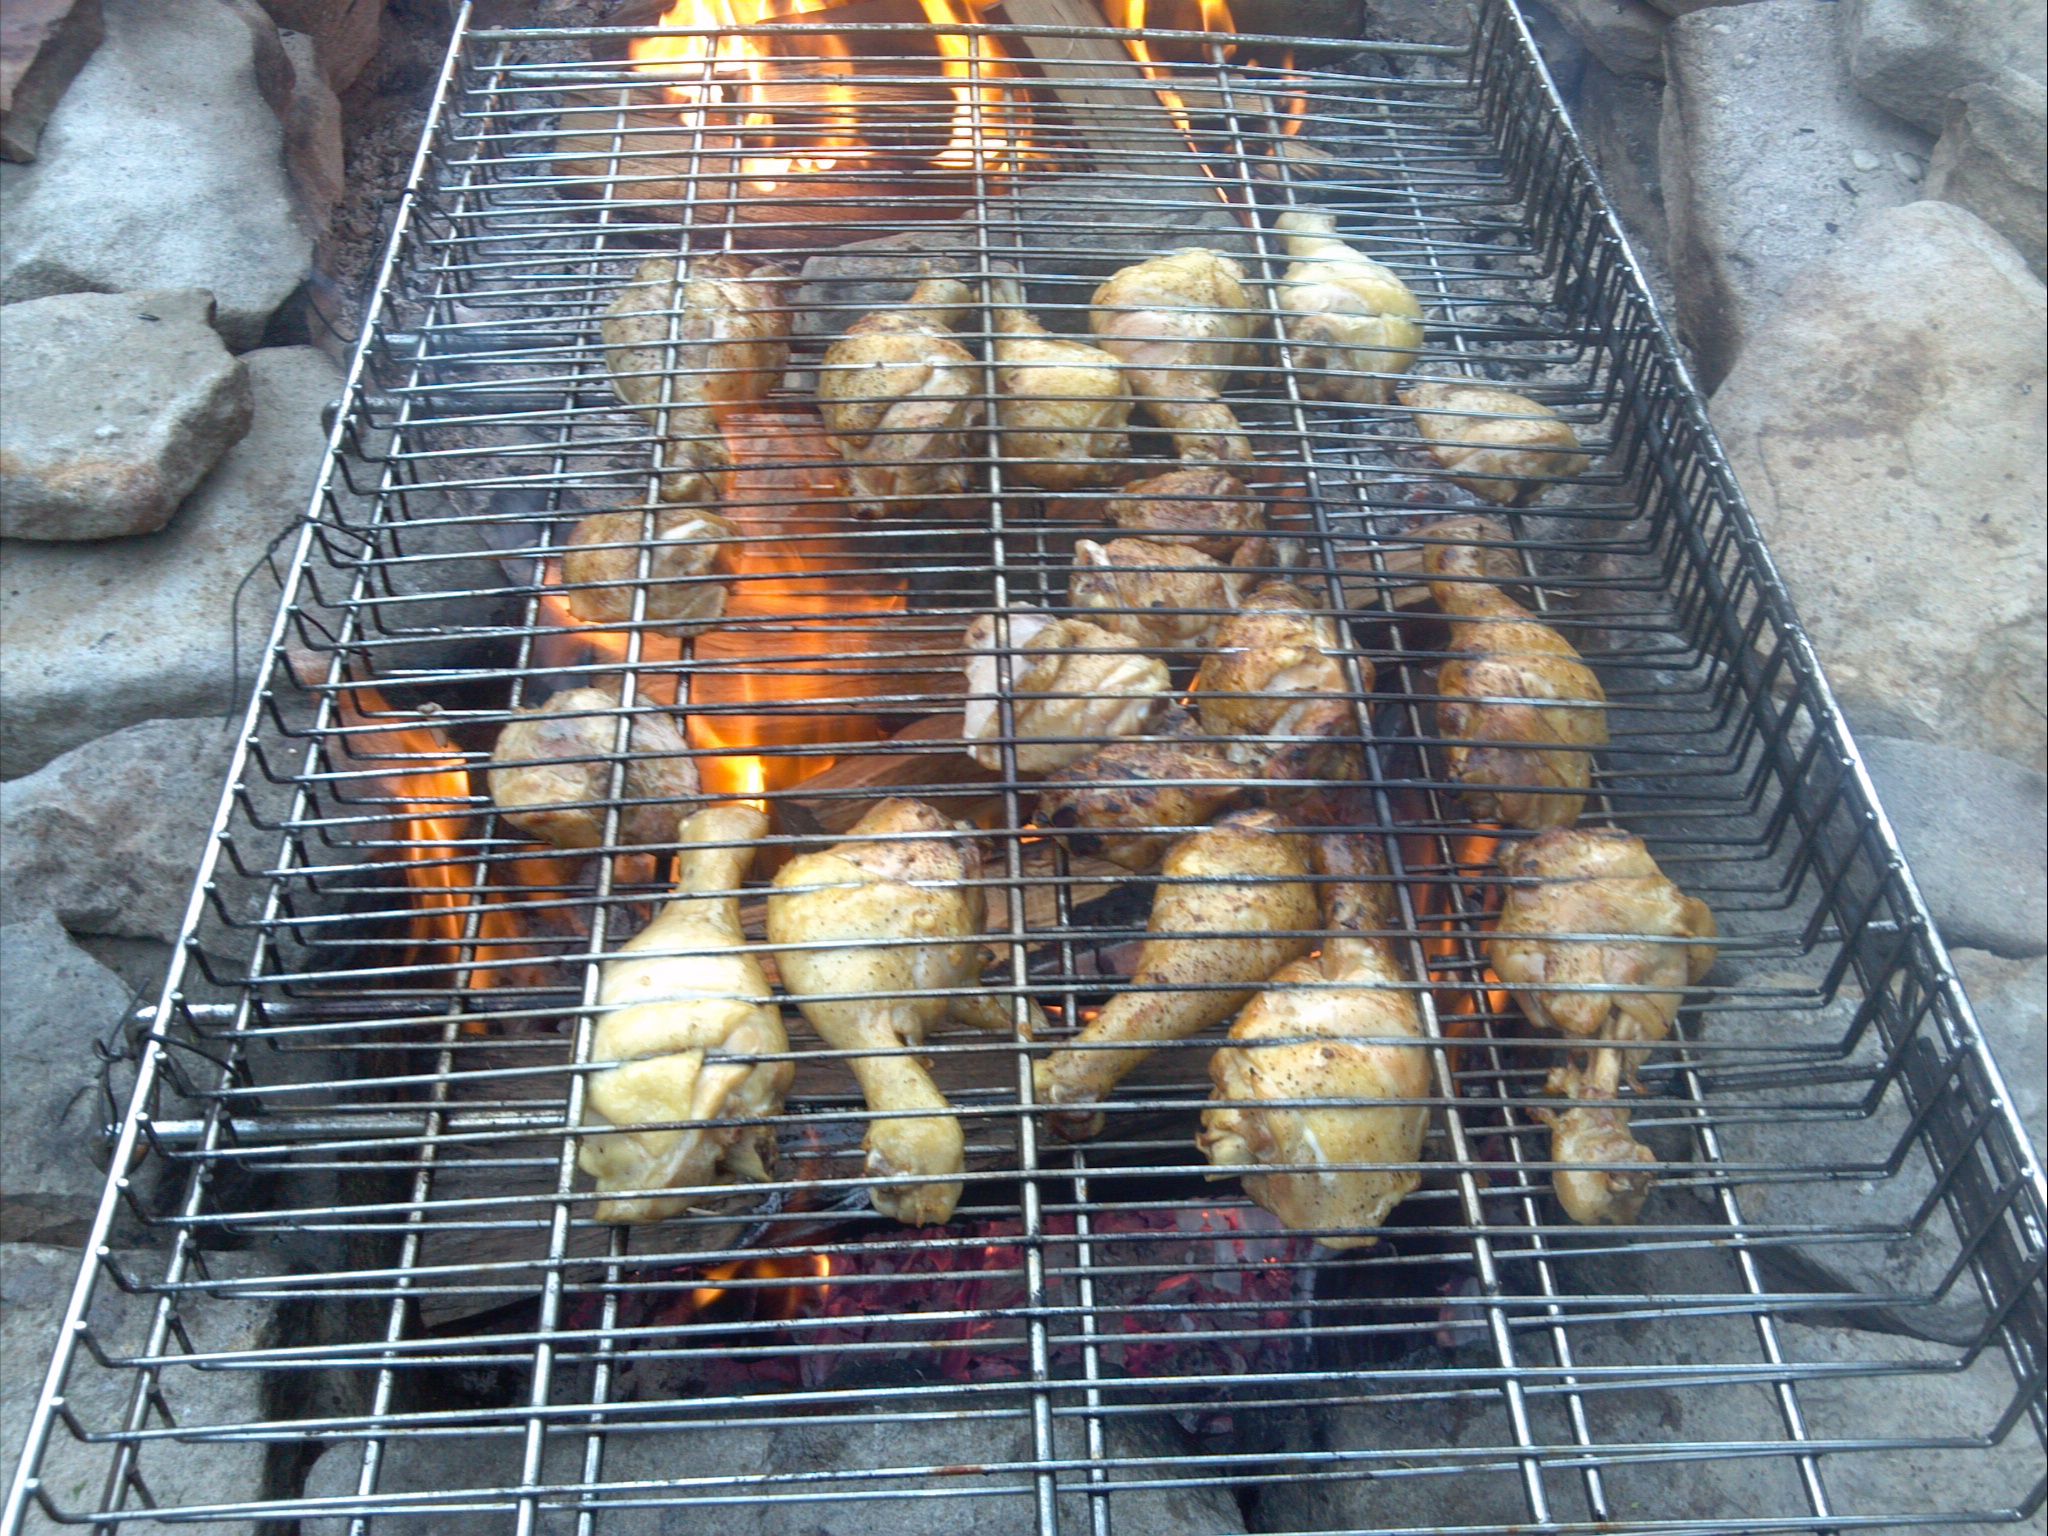 Chicken on the pit!